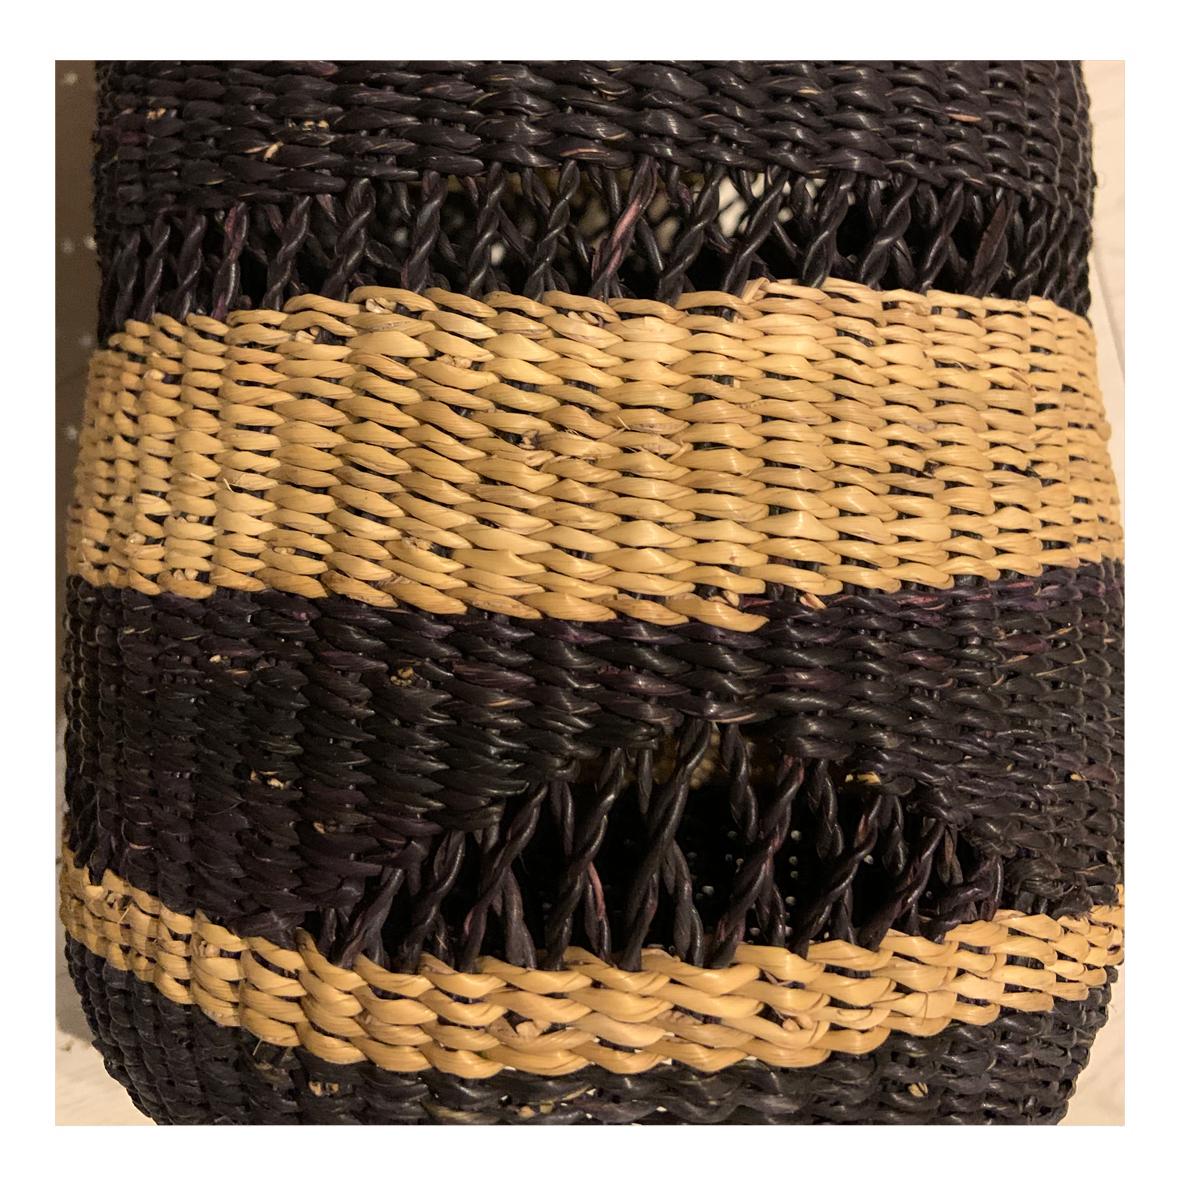 Modern Contemporary Golden Editions Patterned Wall Lantern Handwoven Straw Black